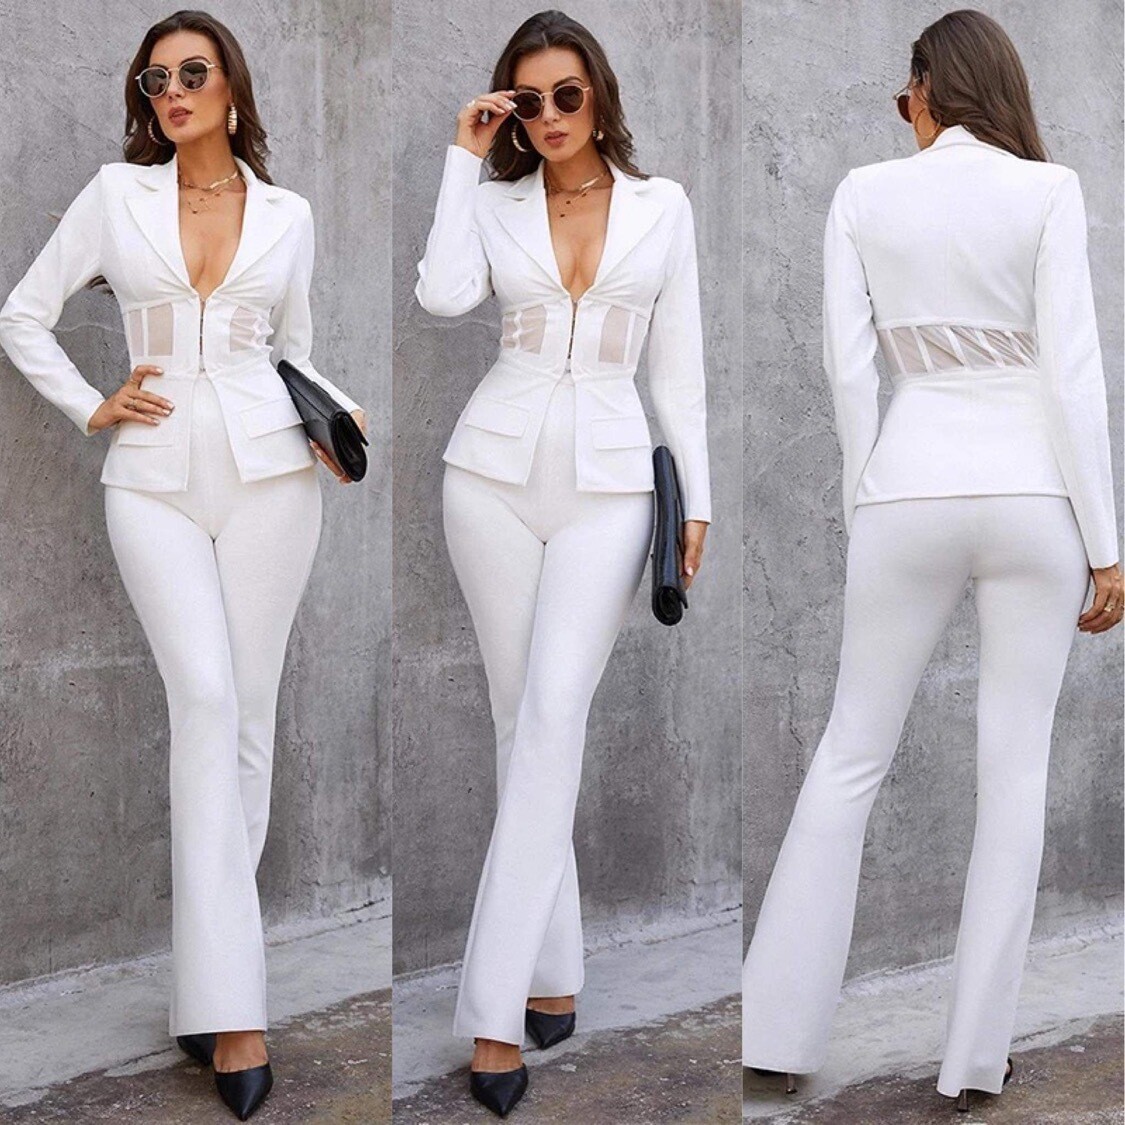 White two piece suit